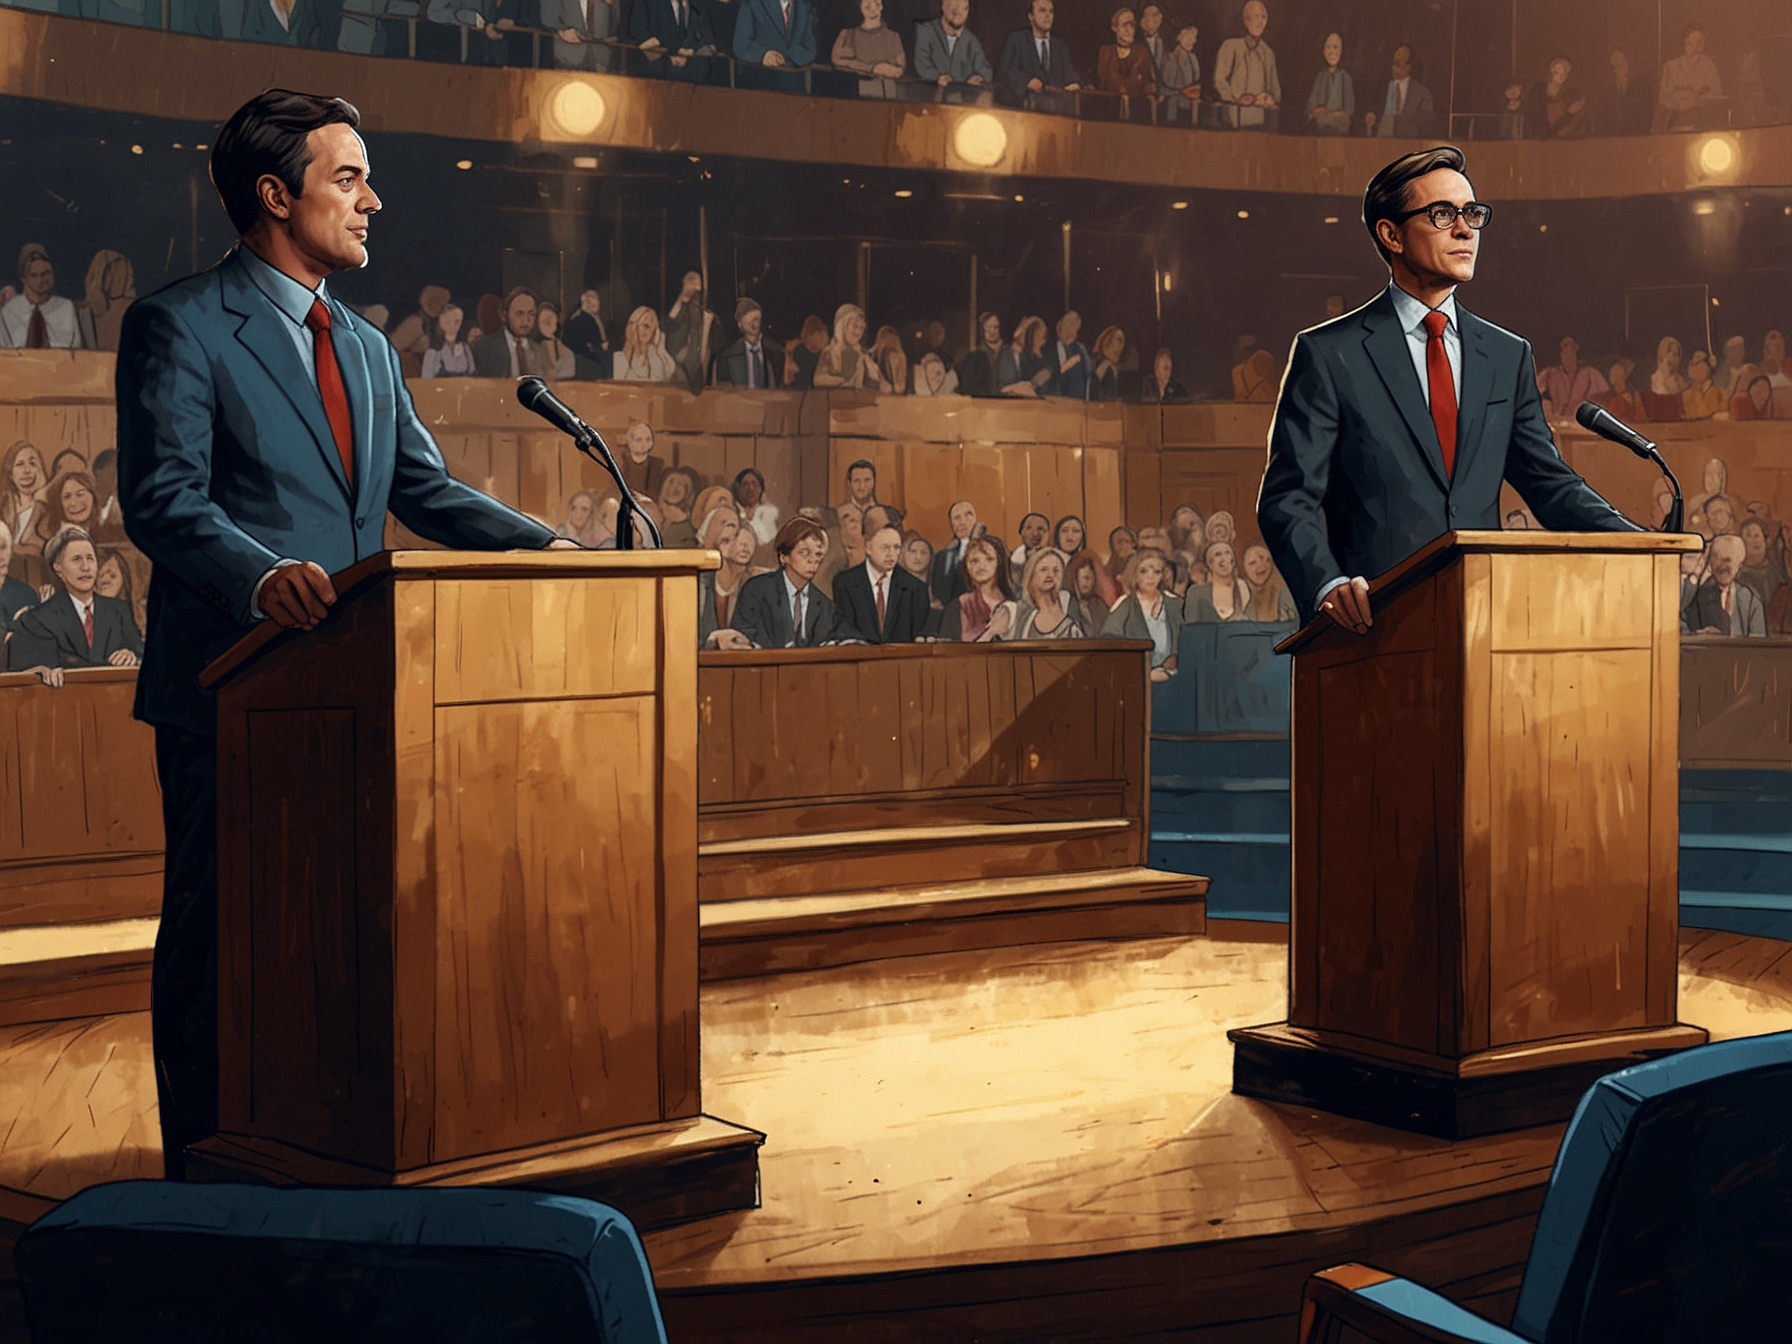 Illustration of two podiums on a stage, symbolizing the candidates' debate, with a diverse audience eagerly watching the political showdown.